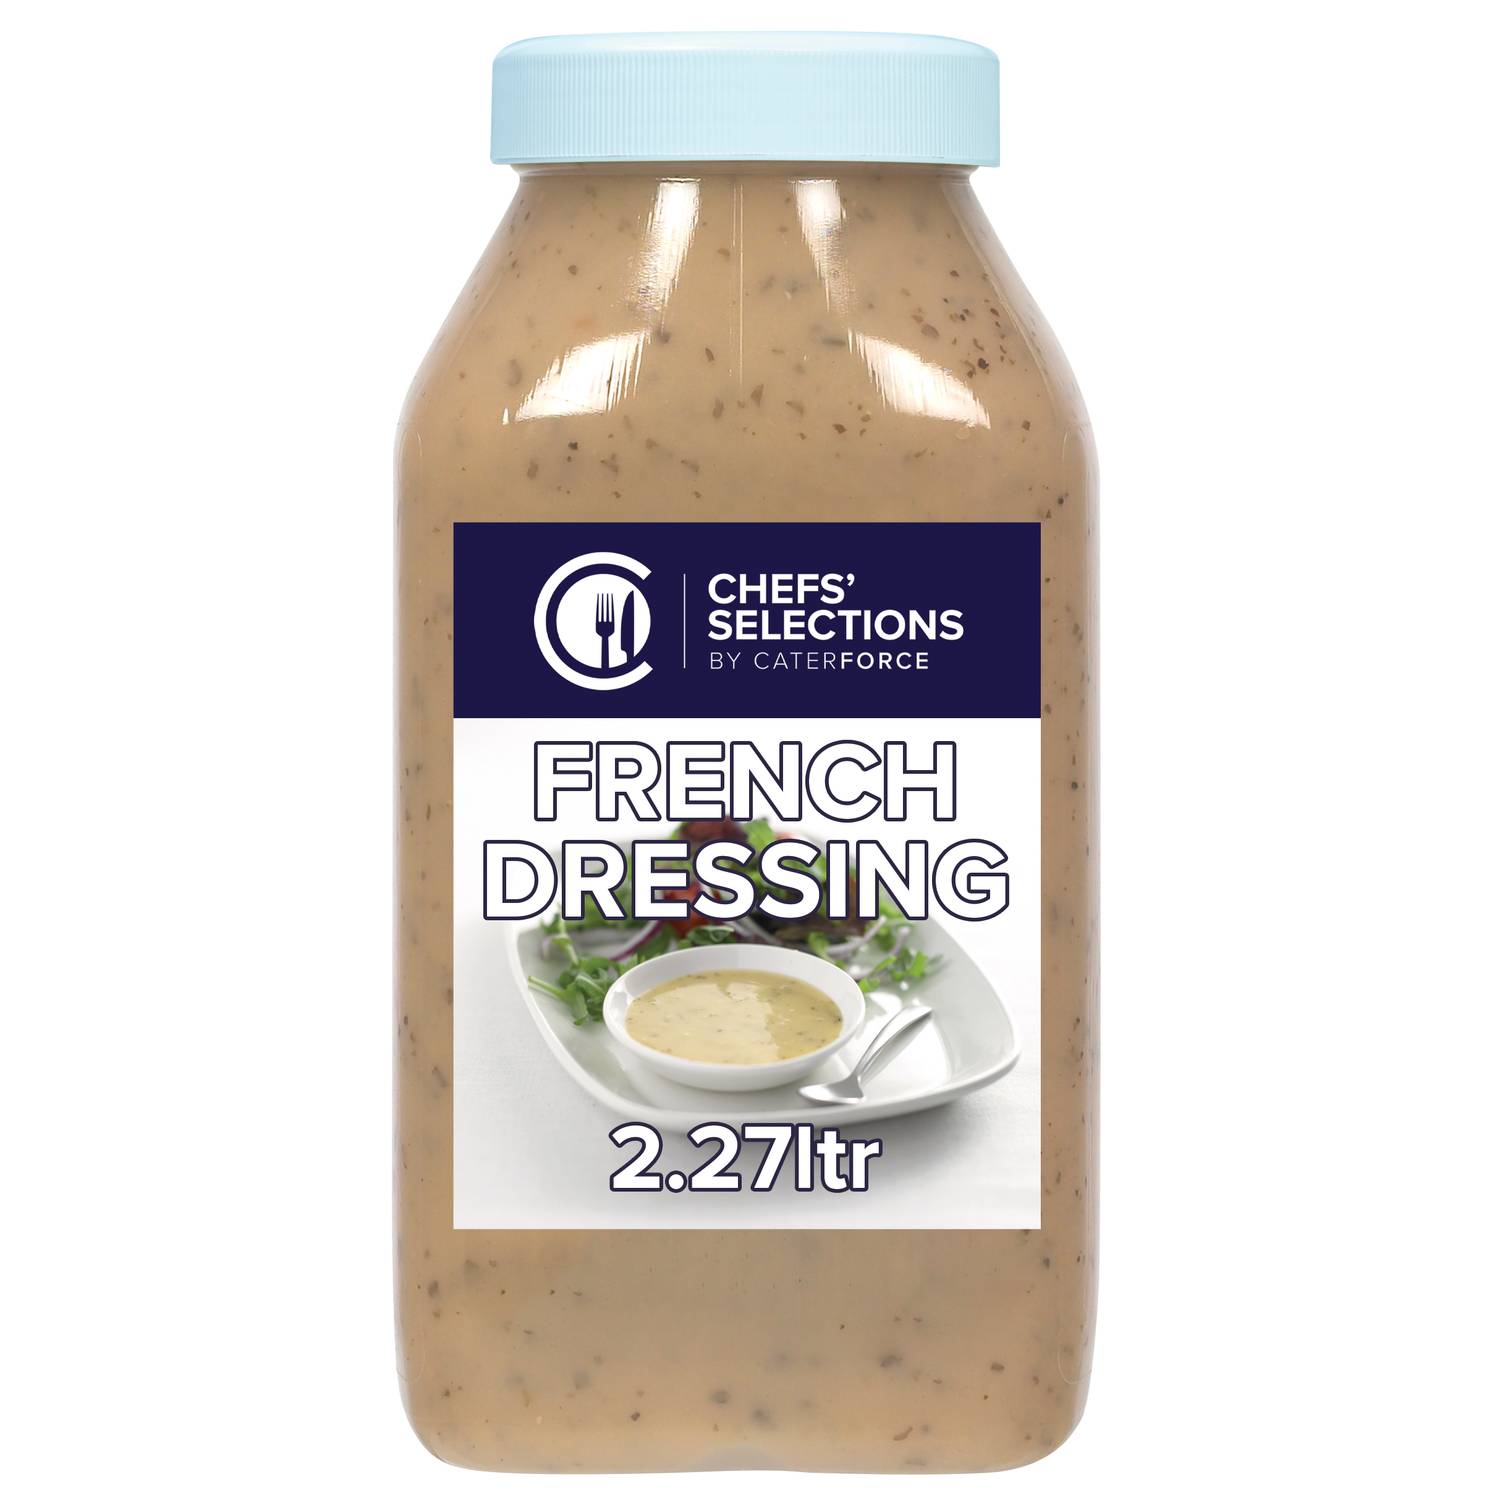 Chefs’ Selections French Dressing (2 x 2.27L)